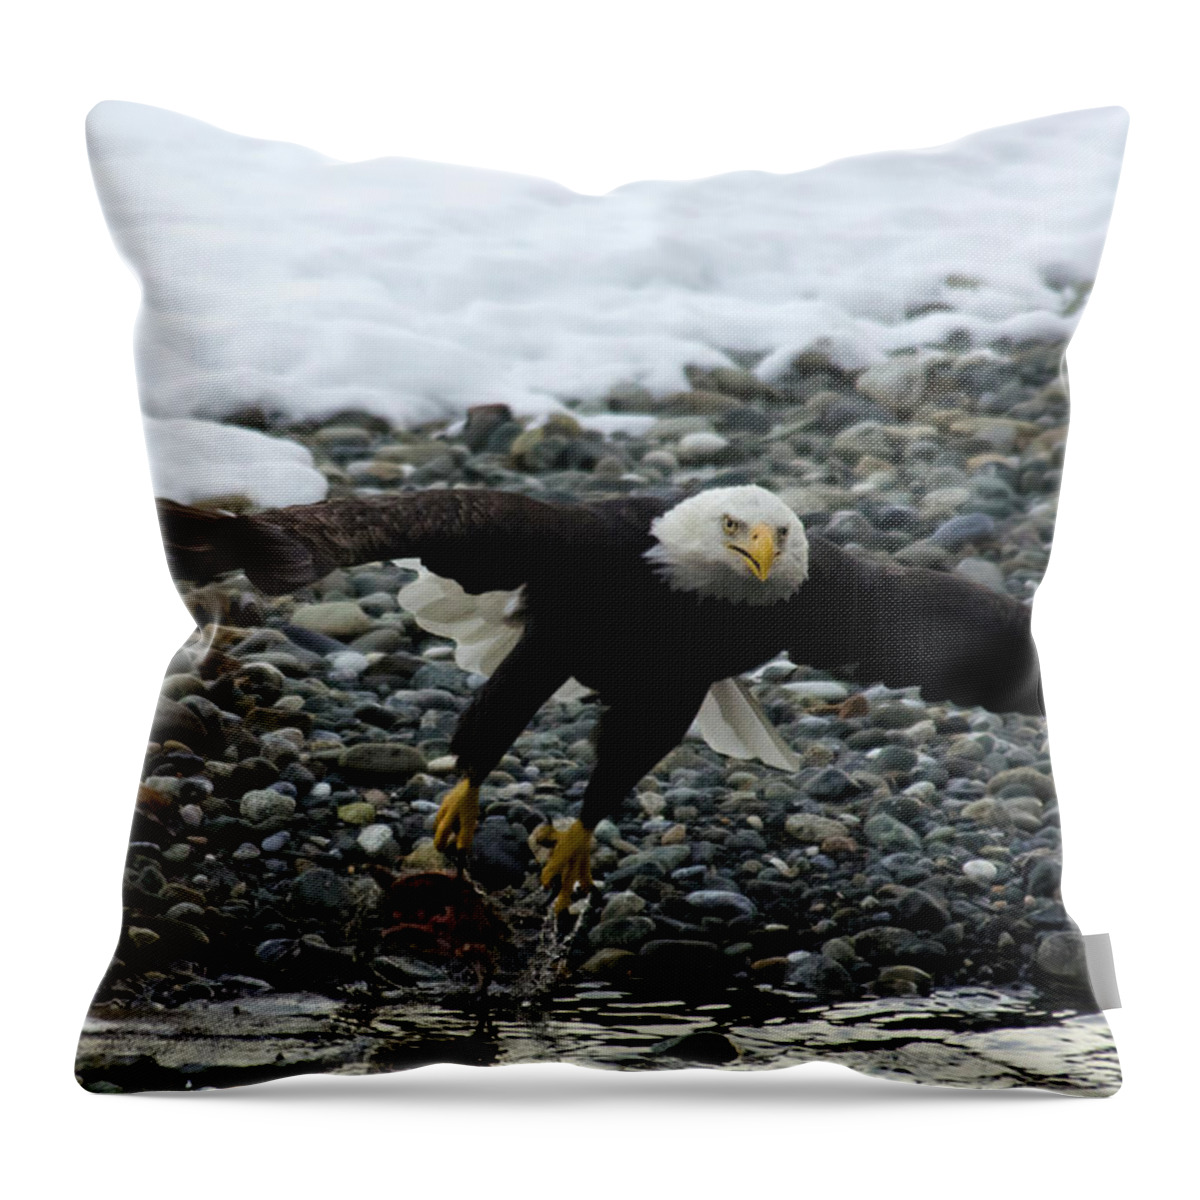 Taking Off Throw Pillow featuring the photograph Bald Eagle Taking Off From River by Mark Newman